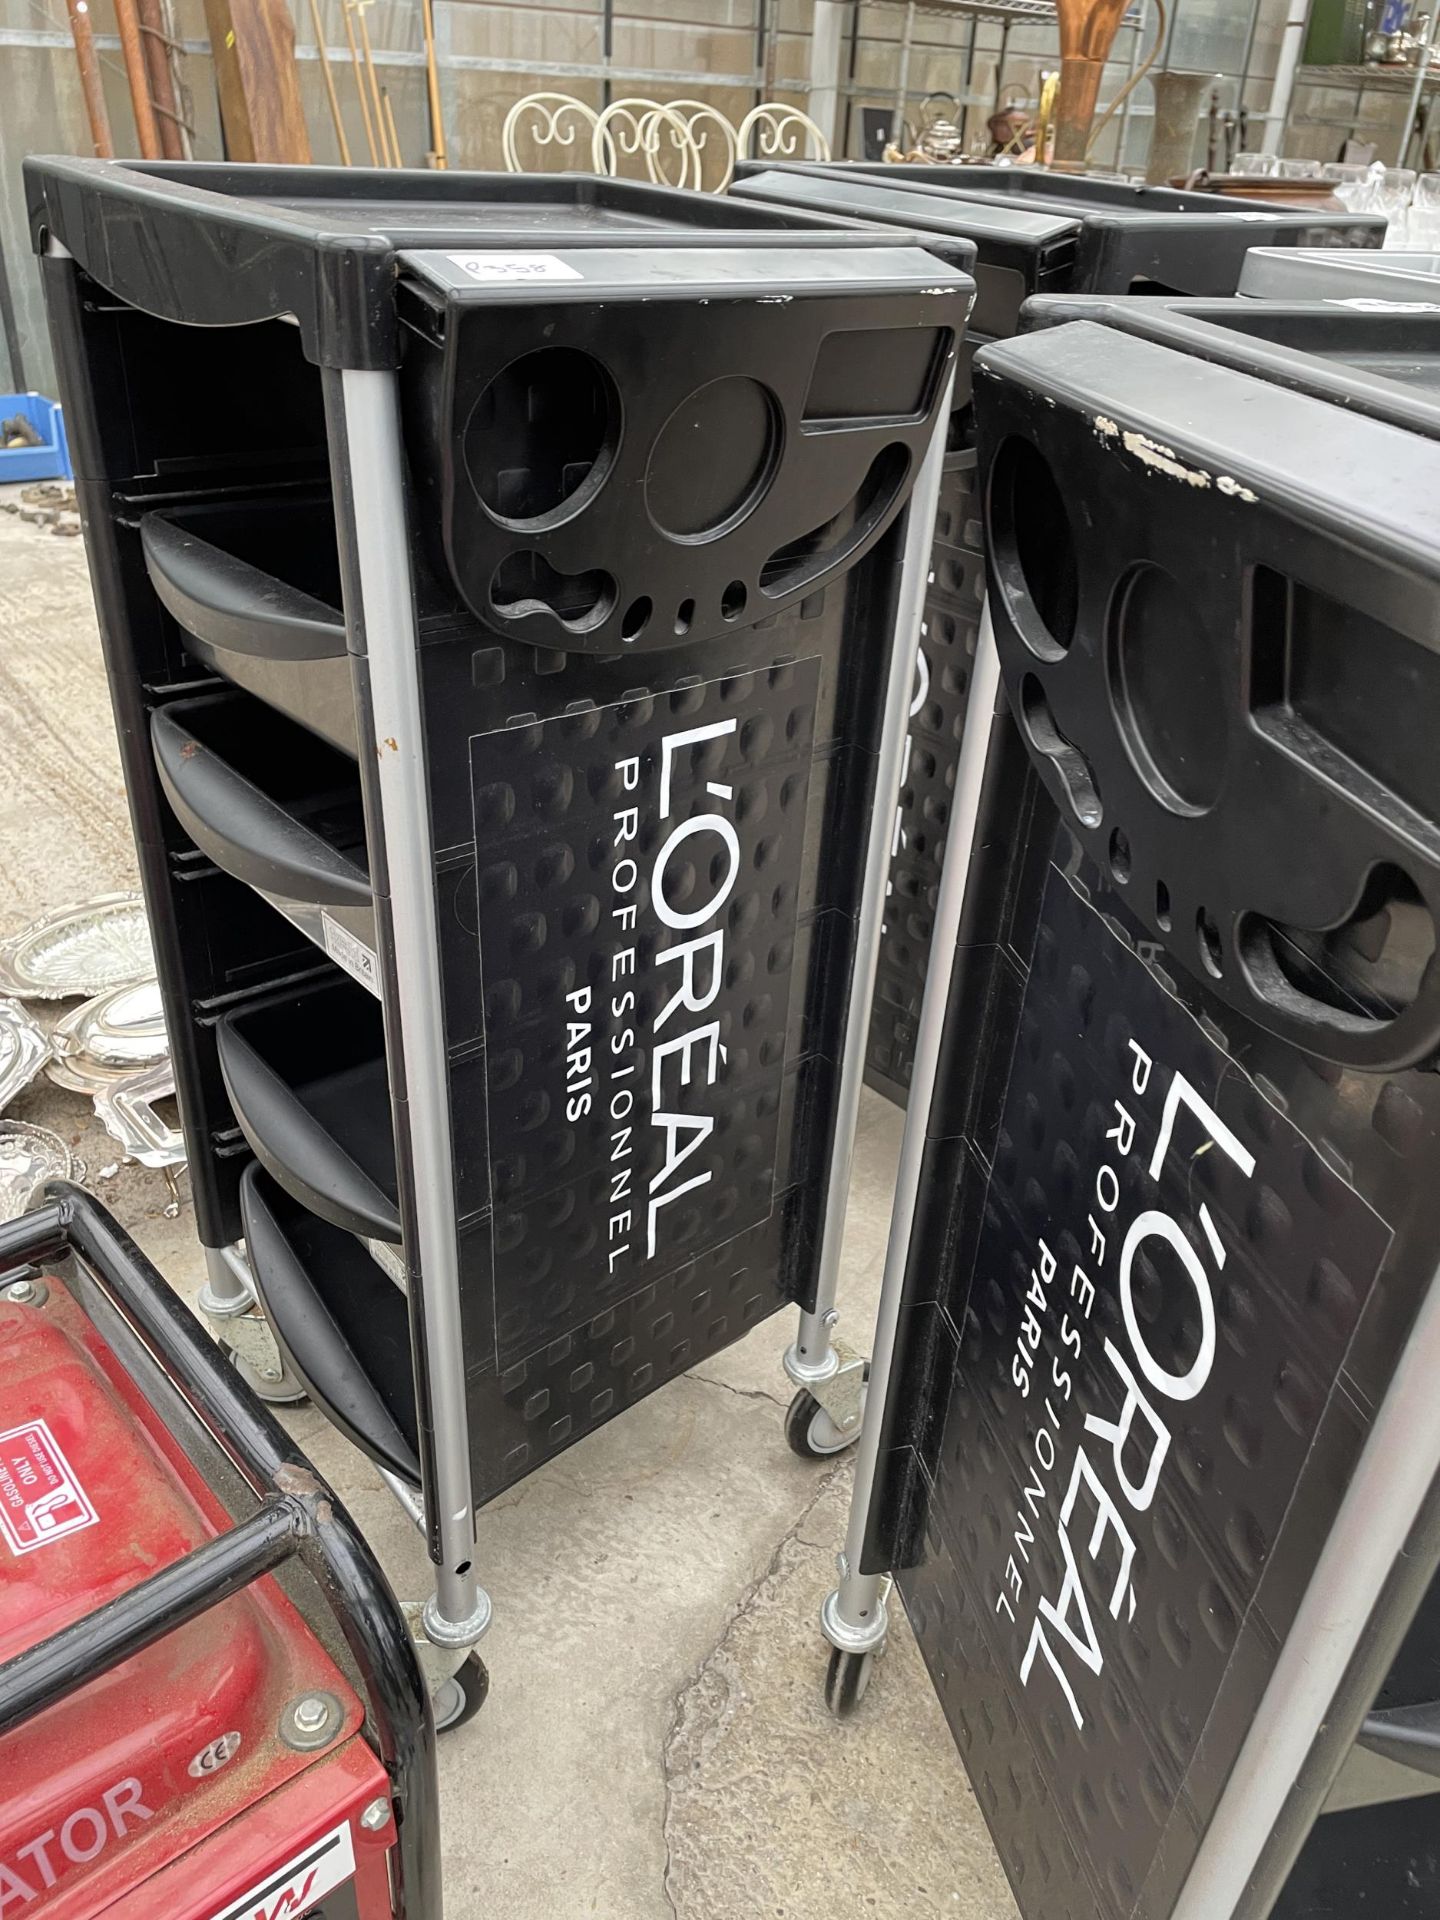 TWO LOREAL HAIRDRESSER TROLLIES - Image 2 of 2